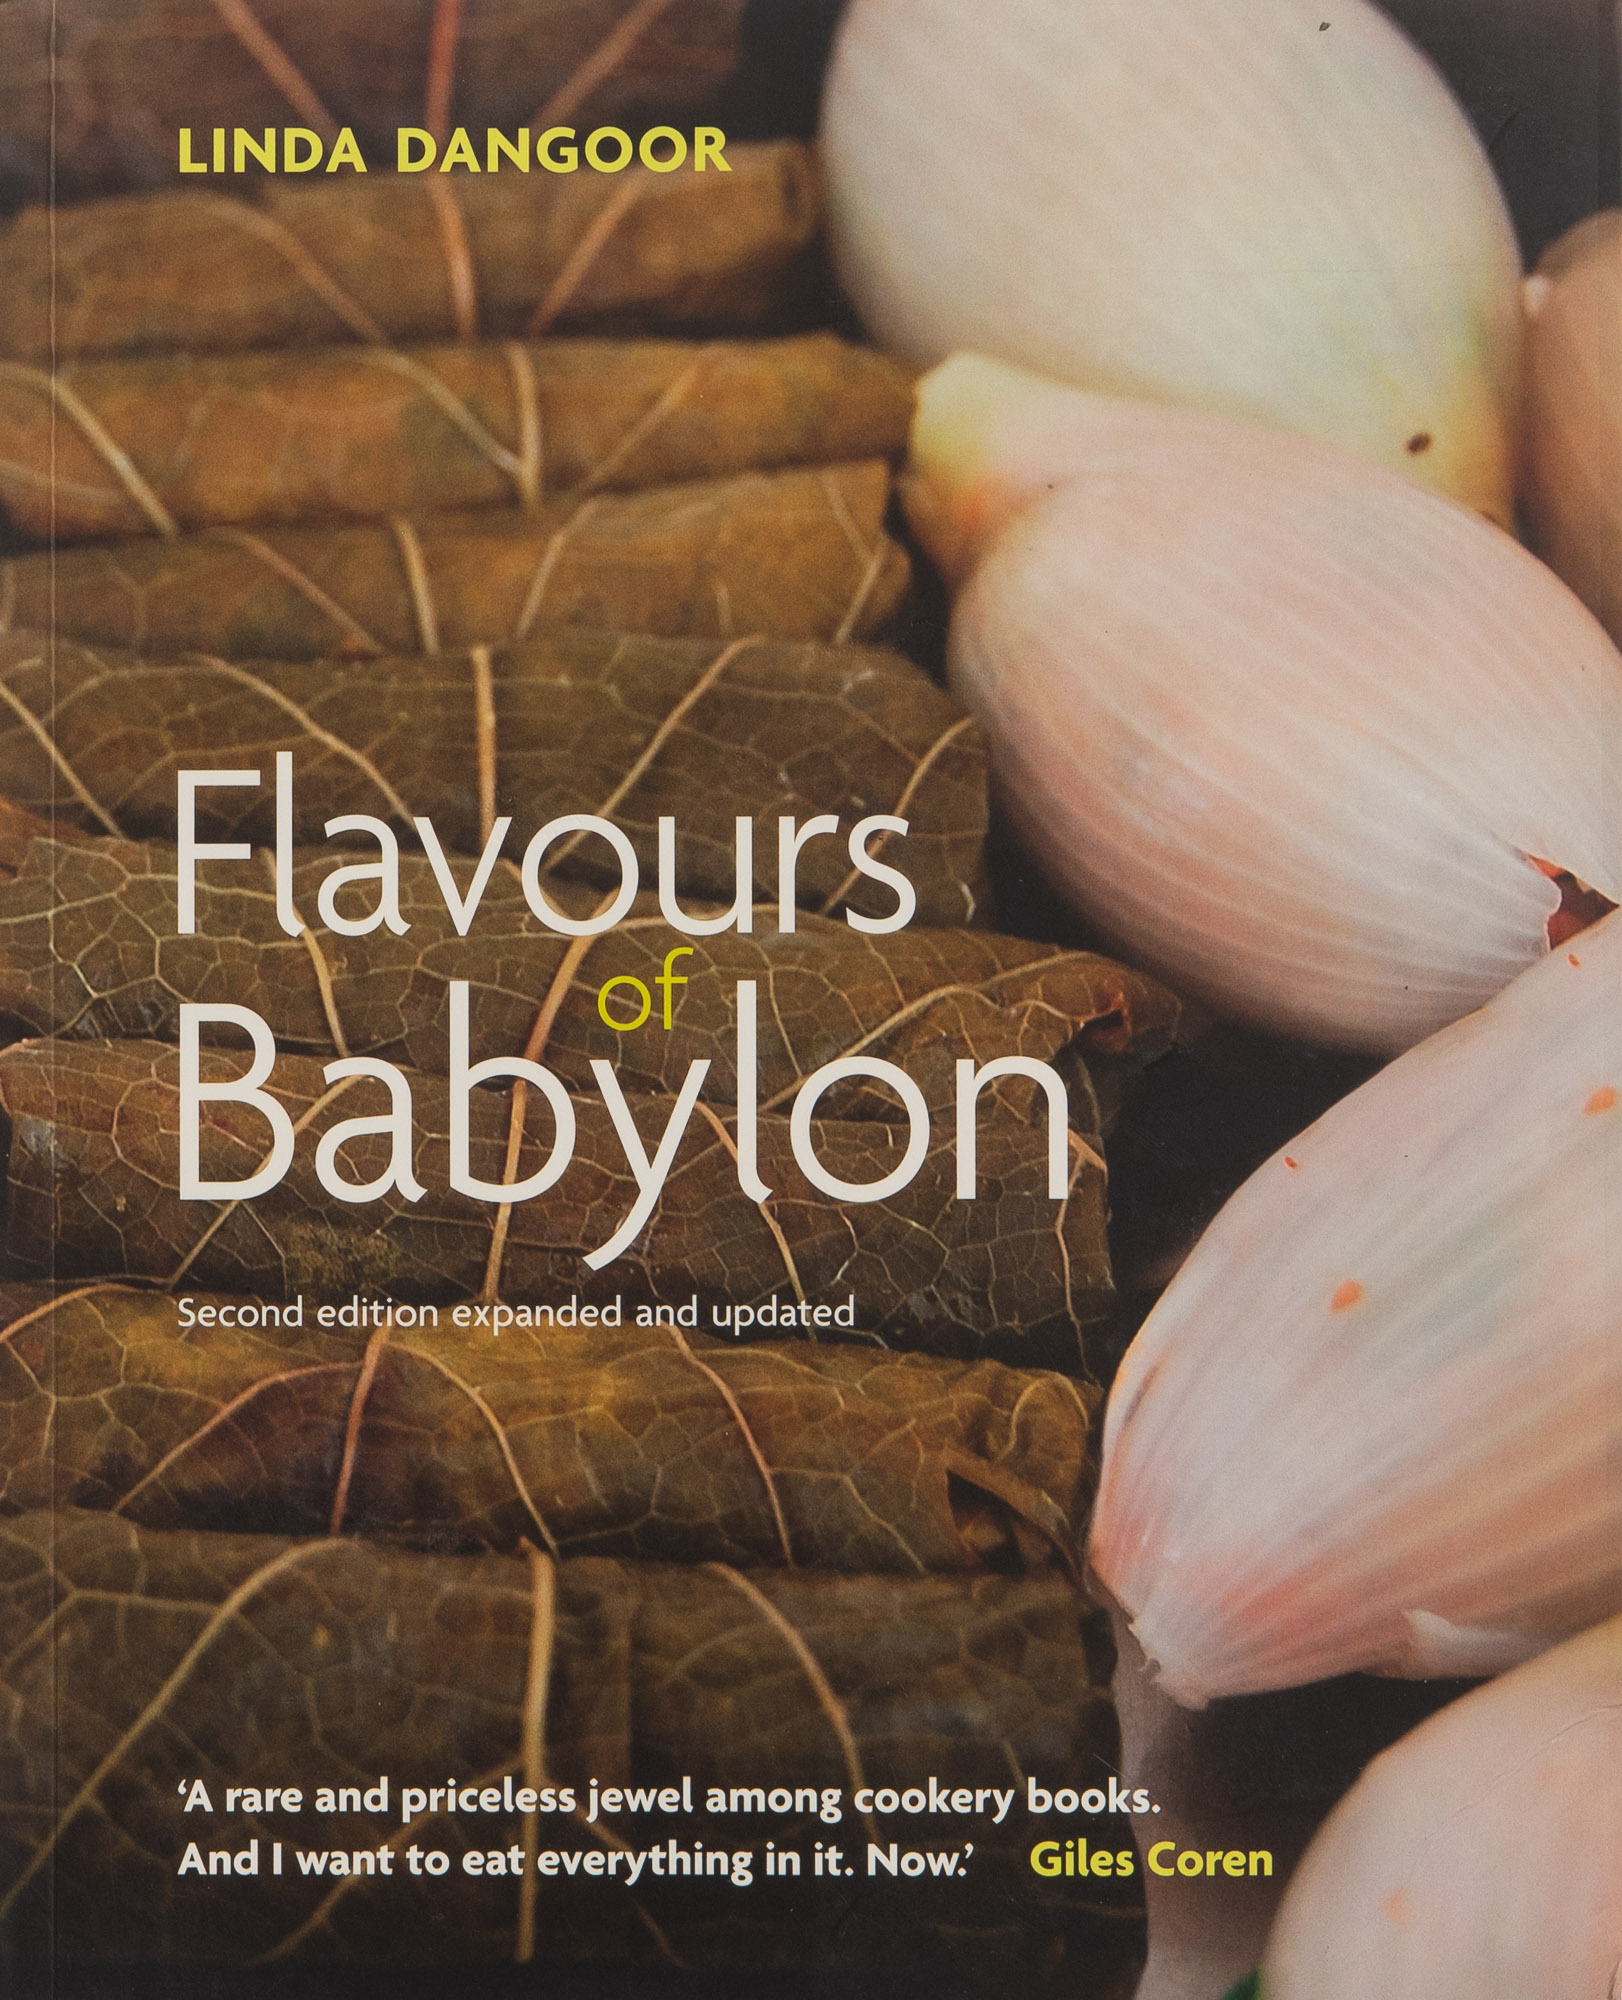 The cover of Flavours of Babylon: A Family Cookbook